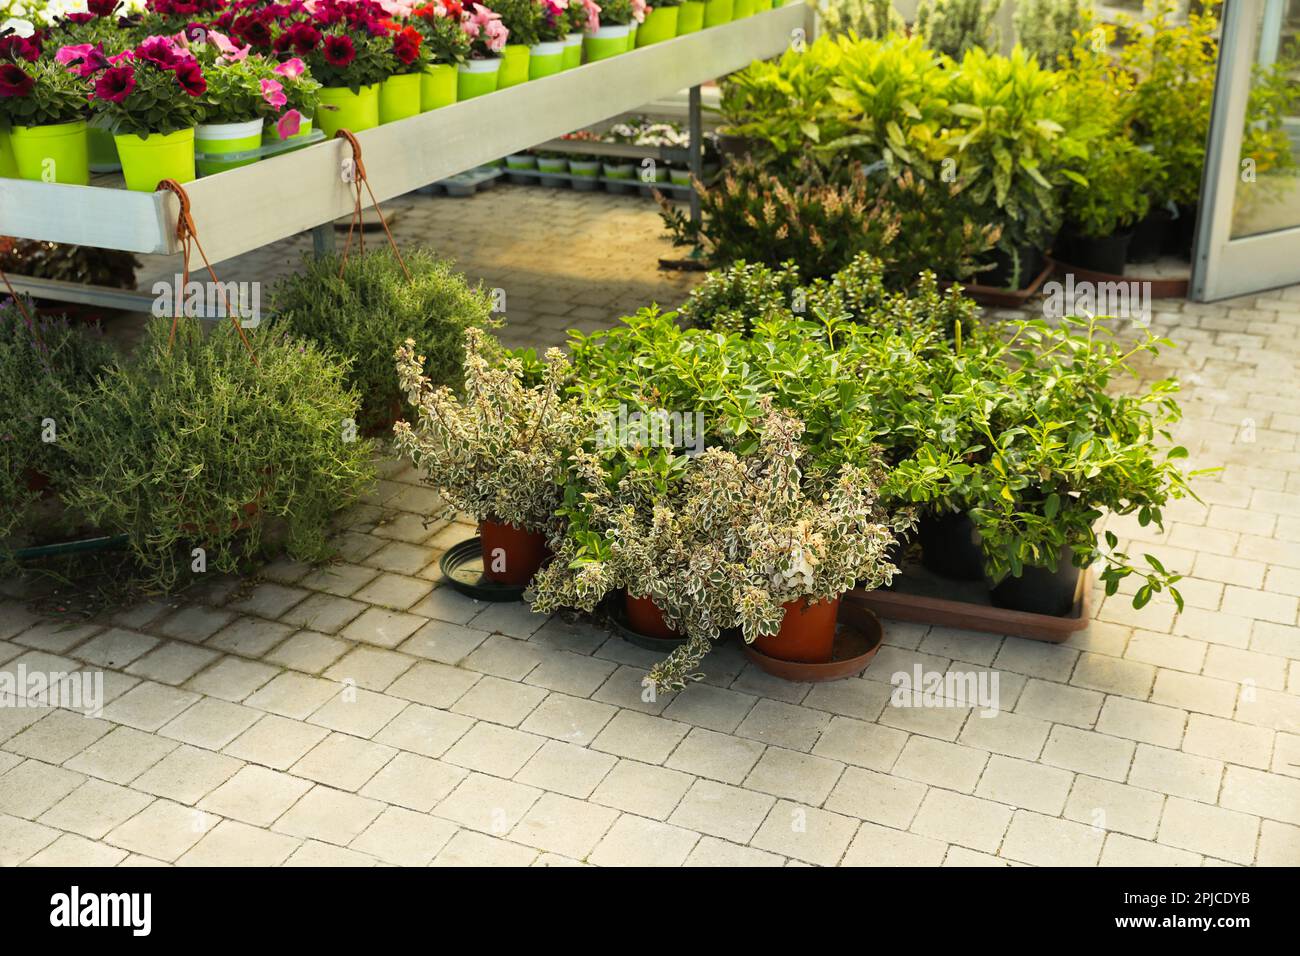 Garden center with many different potted plants Stock Photo